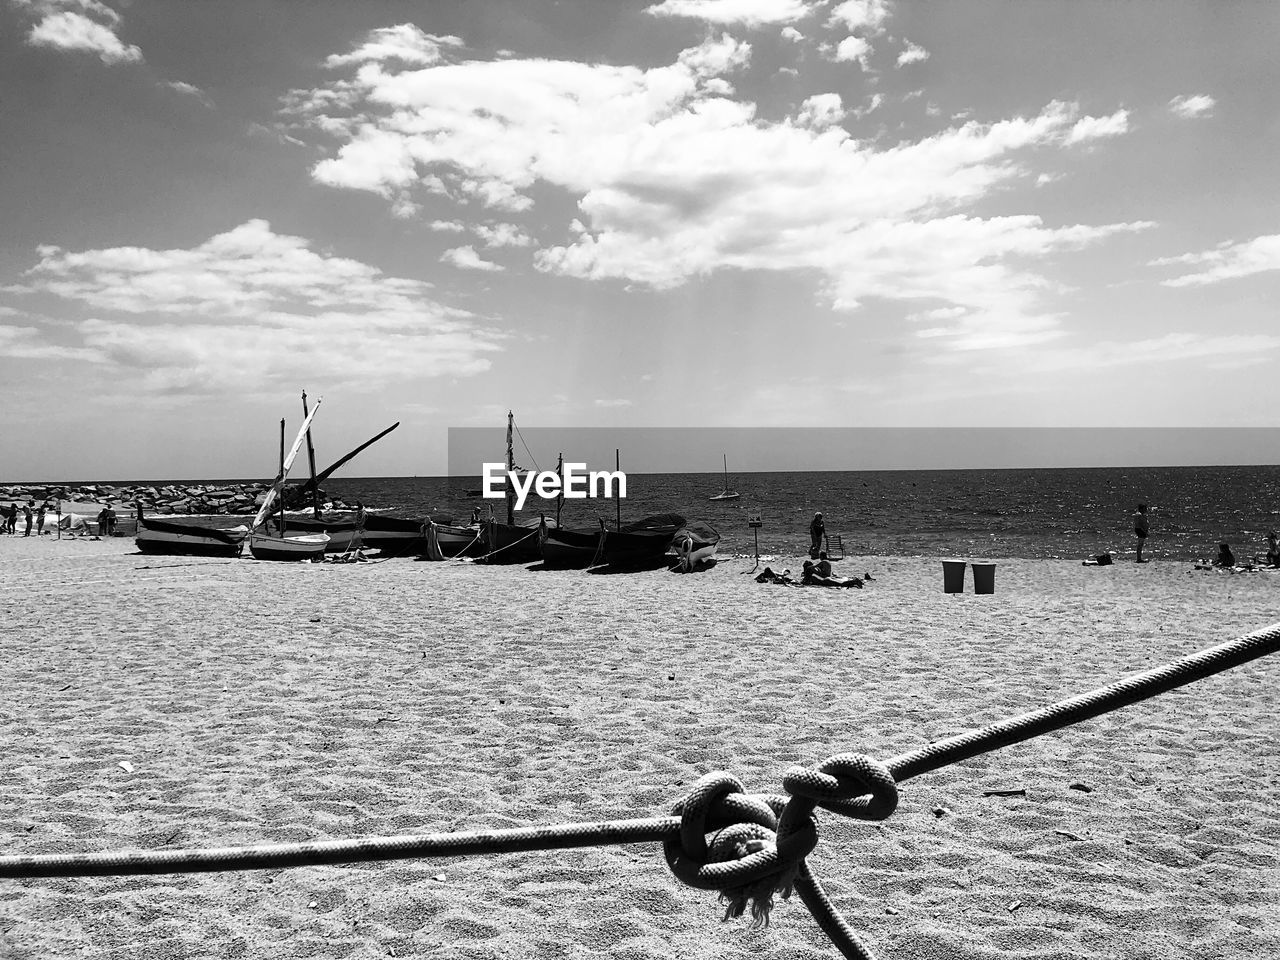 water, sky, sea, black and white, nature, cloud, nautical vessel, monochrome photography, beach, transportation, monochrome, land, day, horizon, scenics - nature, outdoors, horizon over water, mode of transportation, beauty in nature, rope, pier, travel, sunlight, tranquility, buoy, architecture, vehicle, travel destinations, shore, tranquil scene, no people, fishing